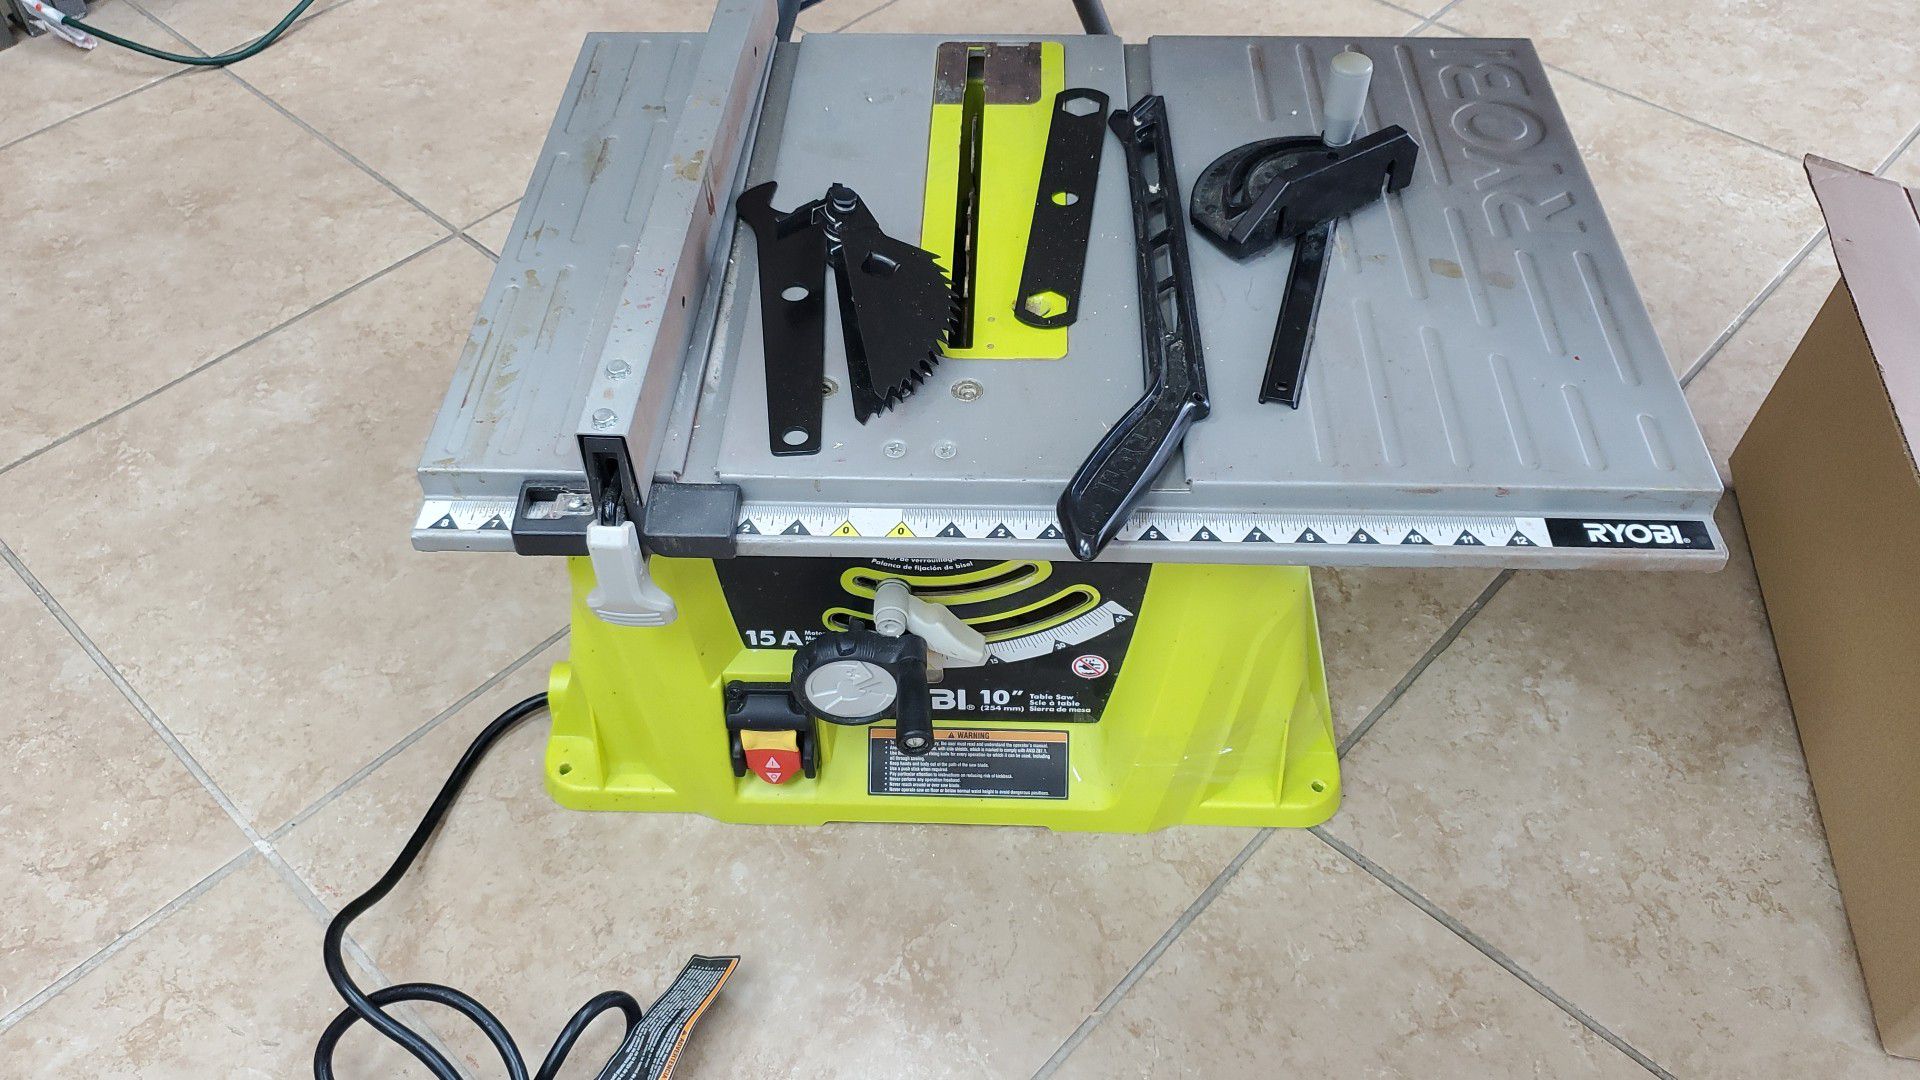 🧨🔥🧨 Ryobi 10" table saw with accessories only 70$!!!🧨🔥🧨 perfect for around the hose projects